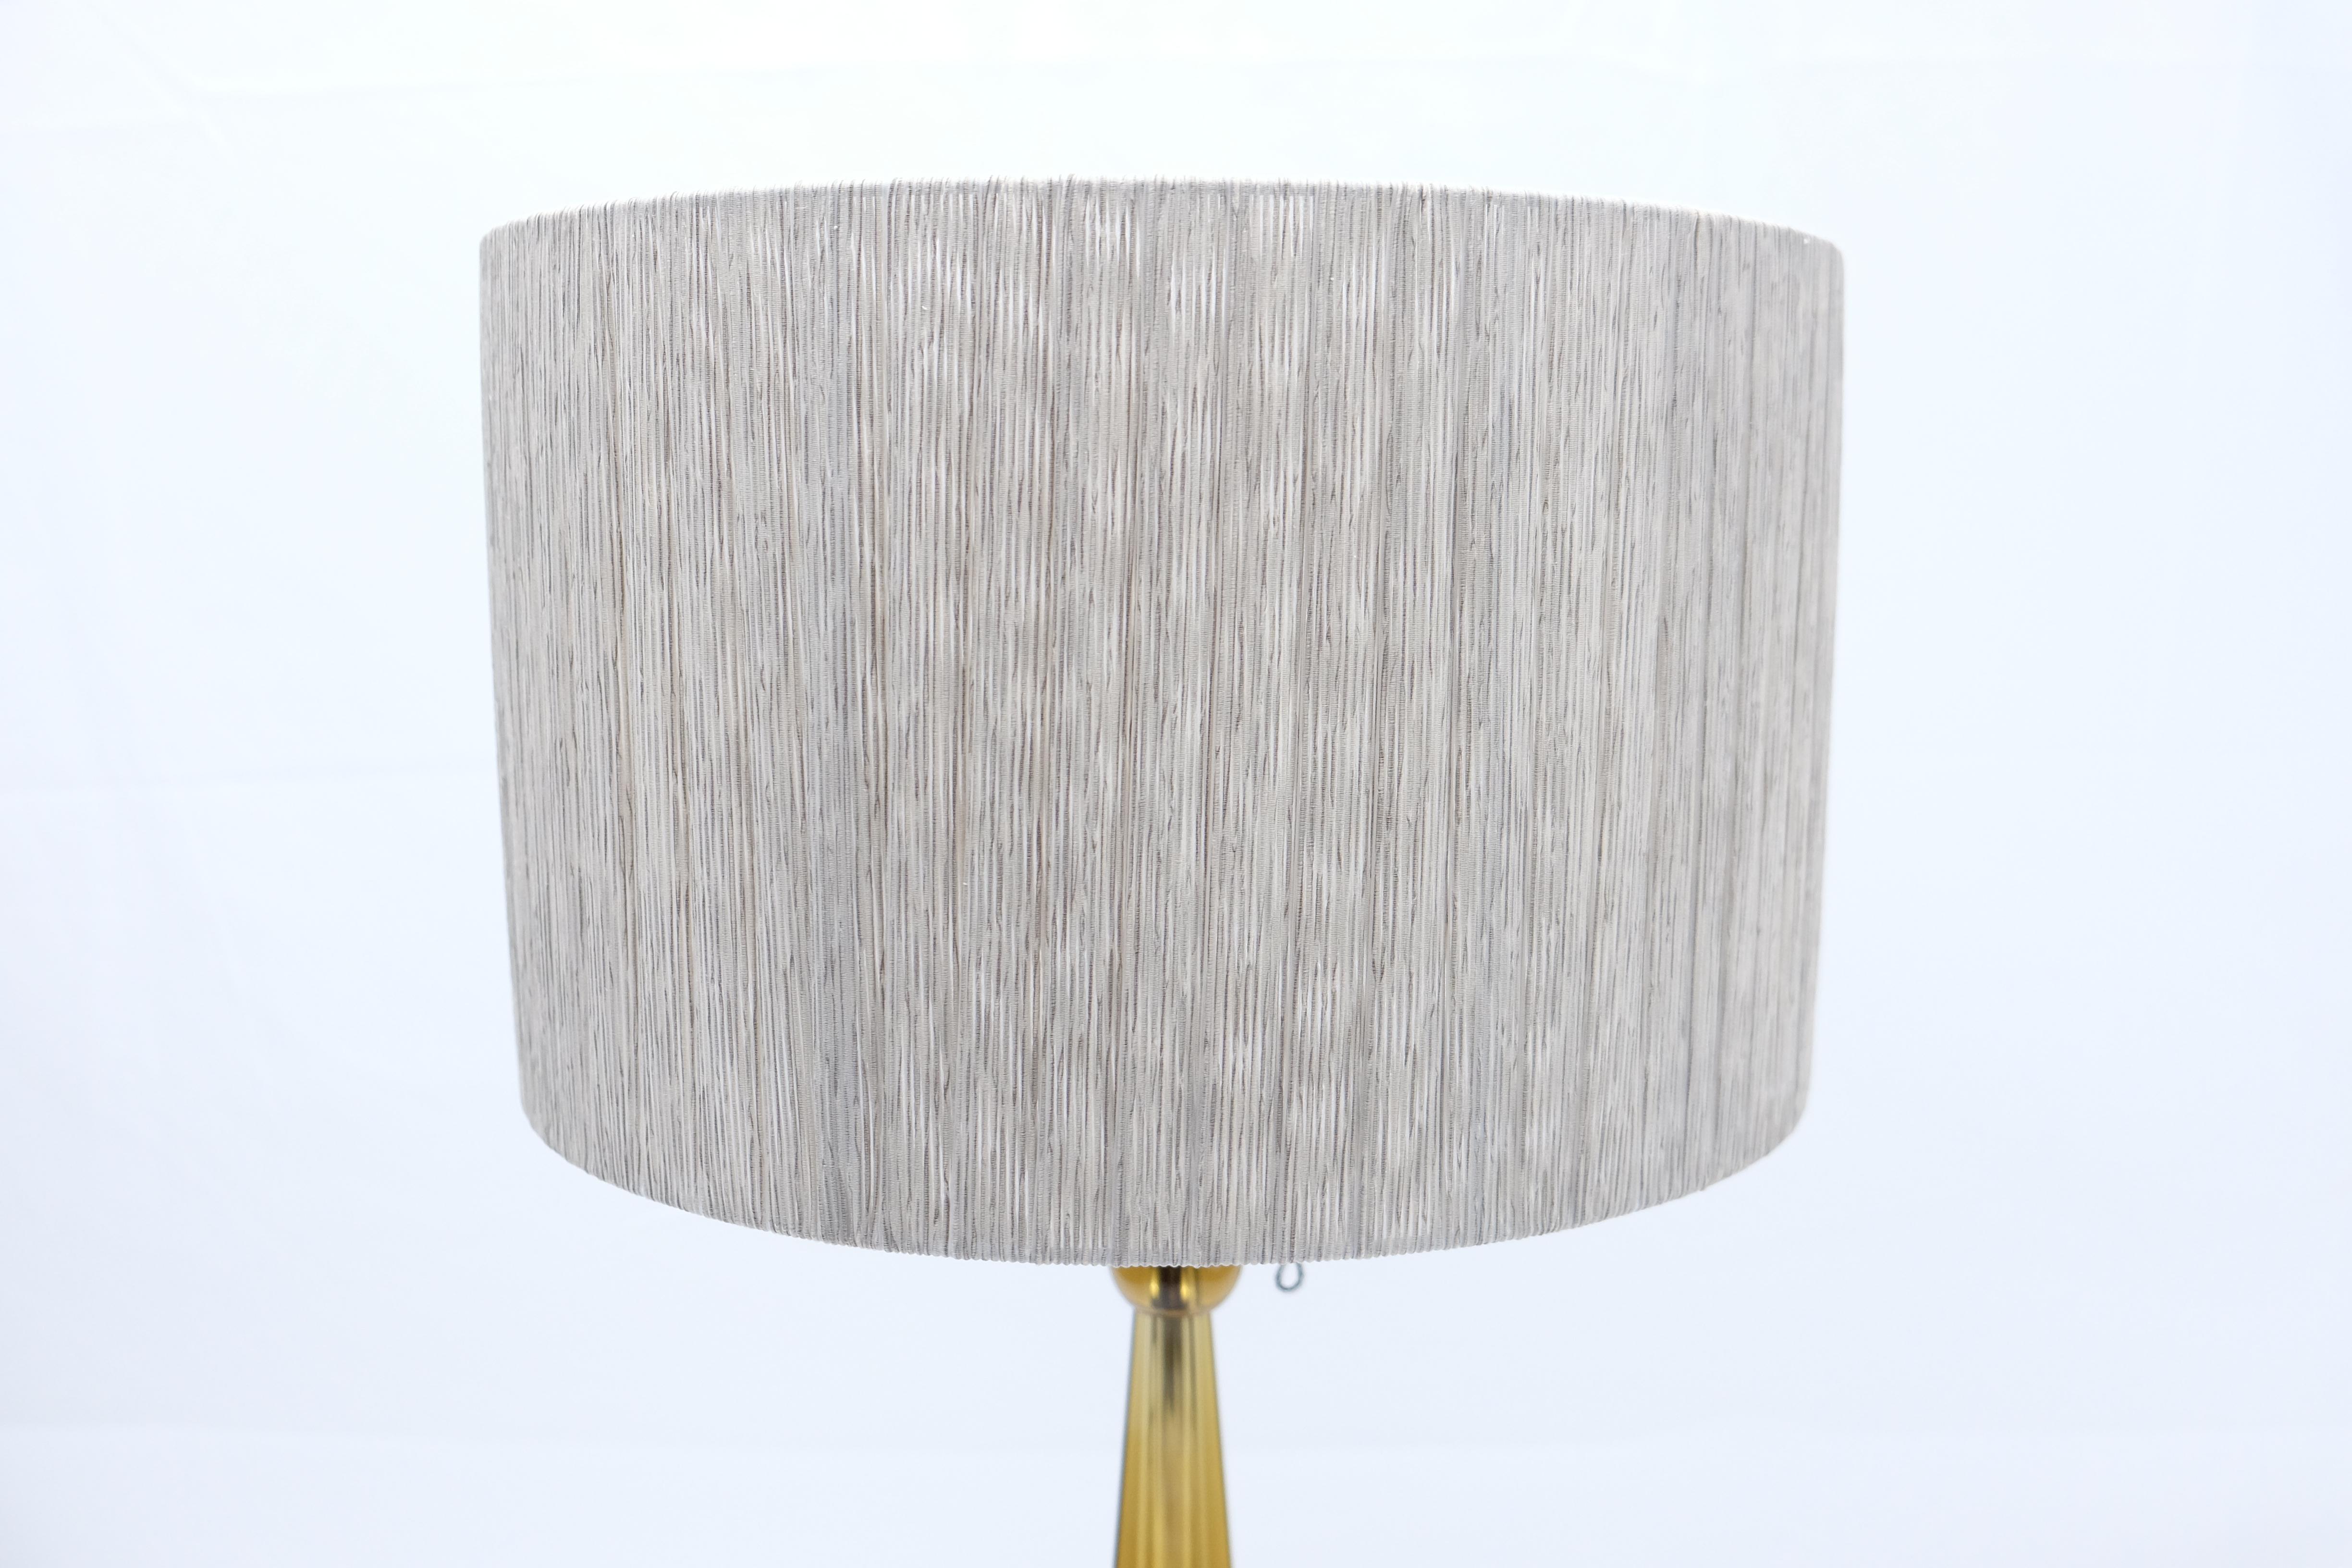 Attilio Amato for Laudarte Srl Prisma big table lamp, pair available offered for sale is a stunning 